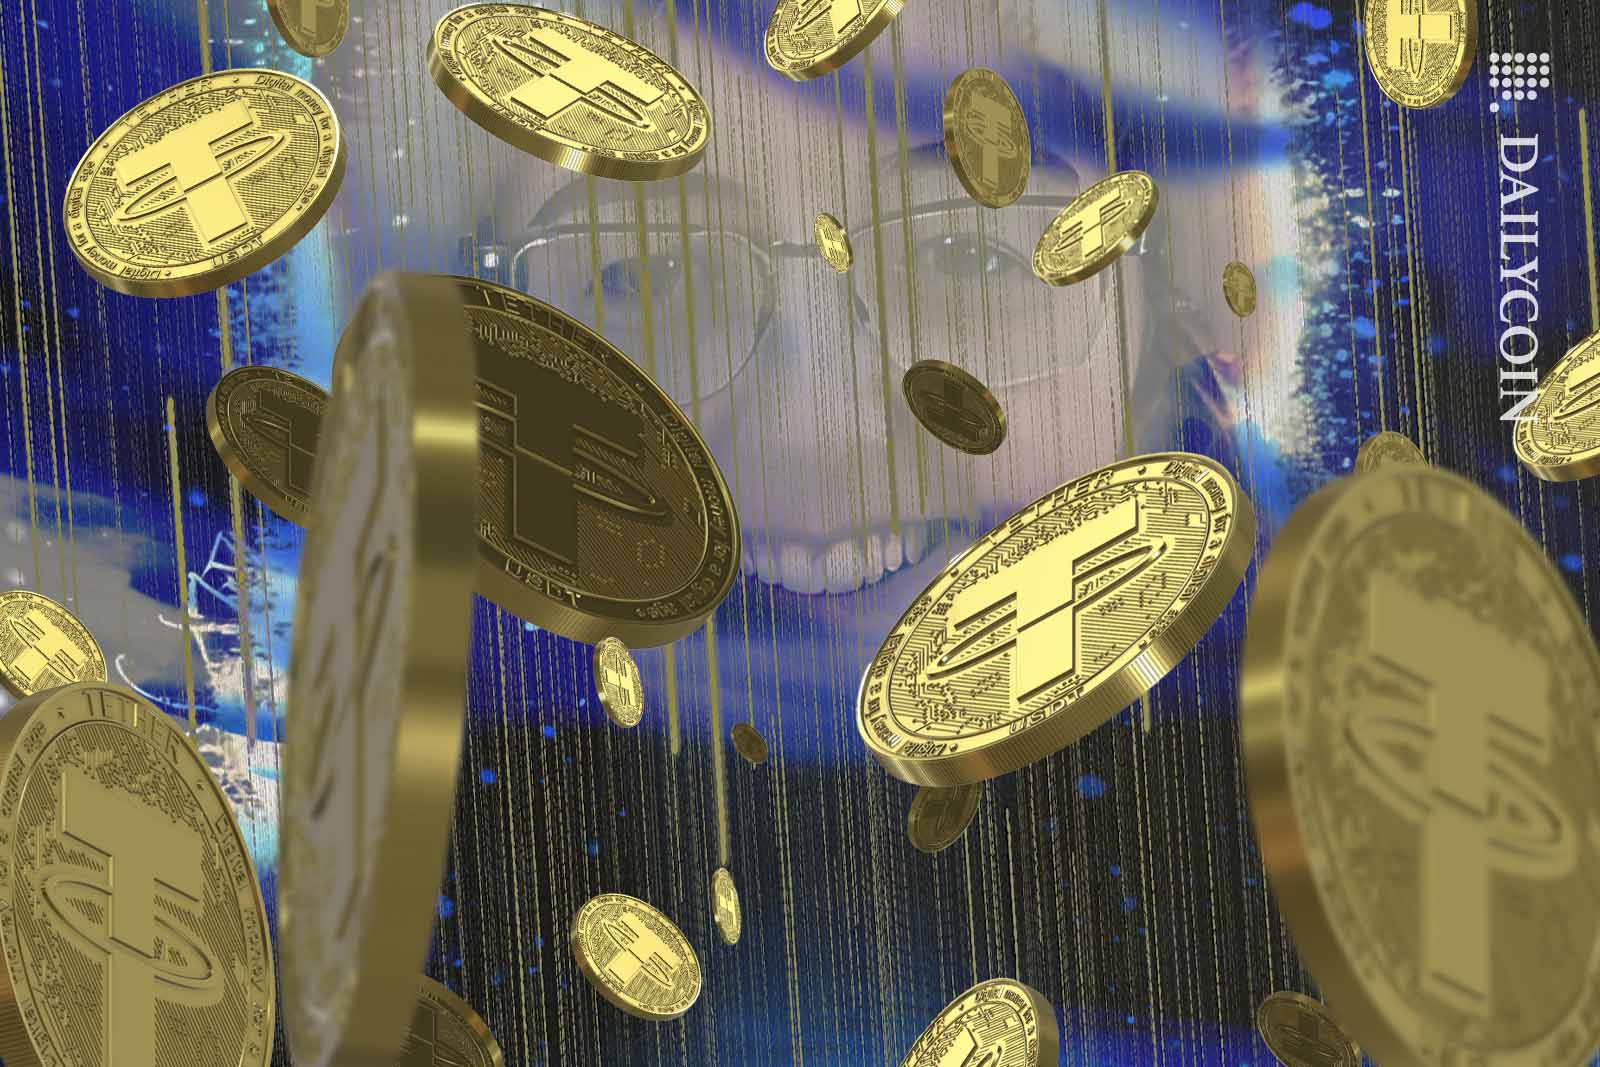 Tether (USDT) coins falling from the sky, with Caroline Ellison's face in the background in the clouds.